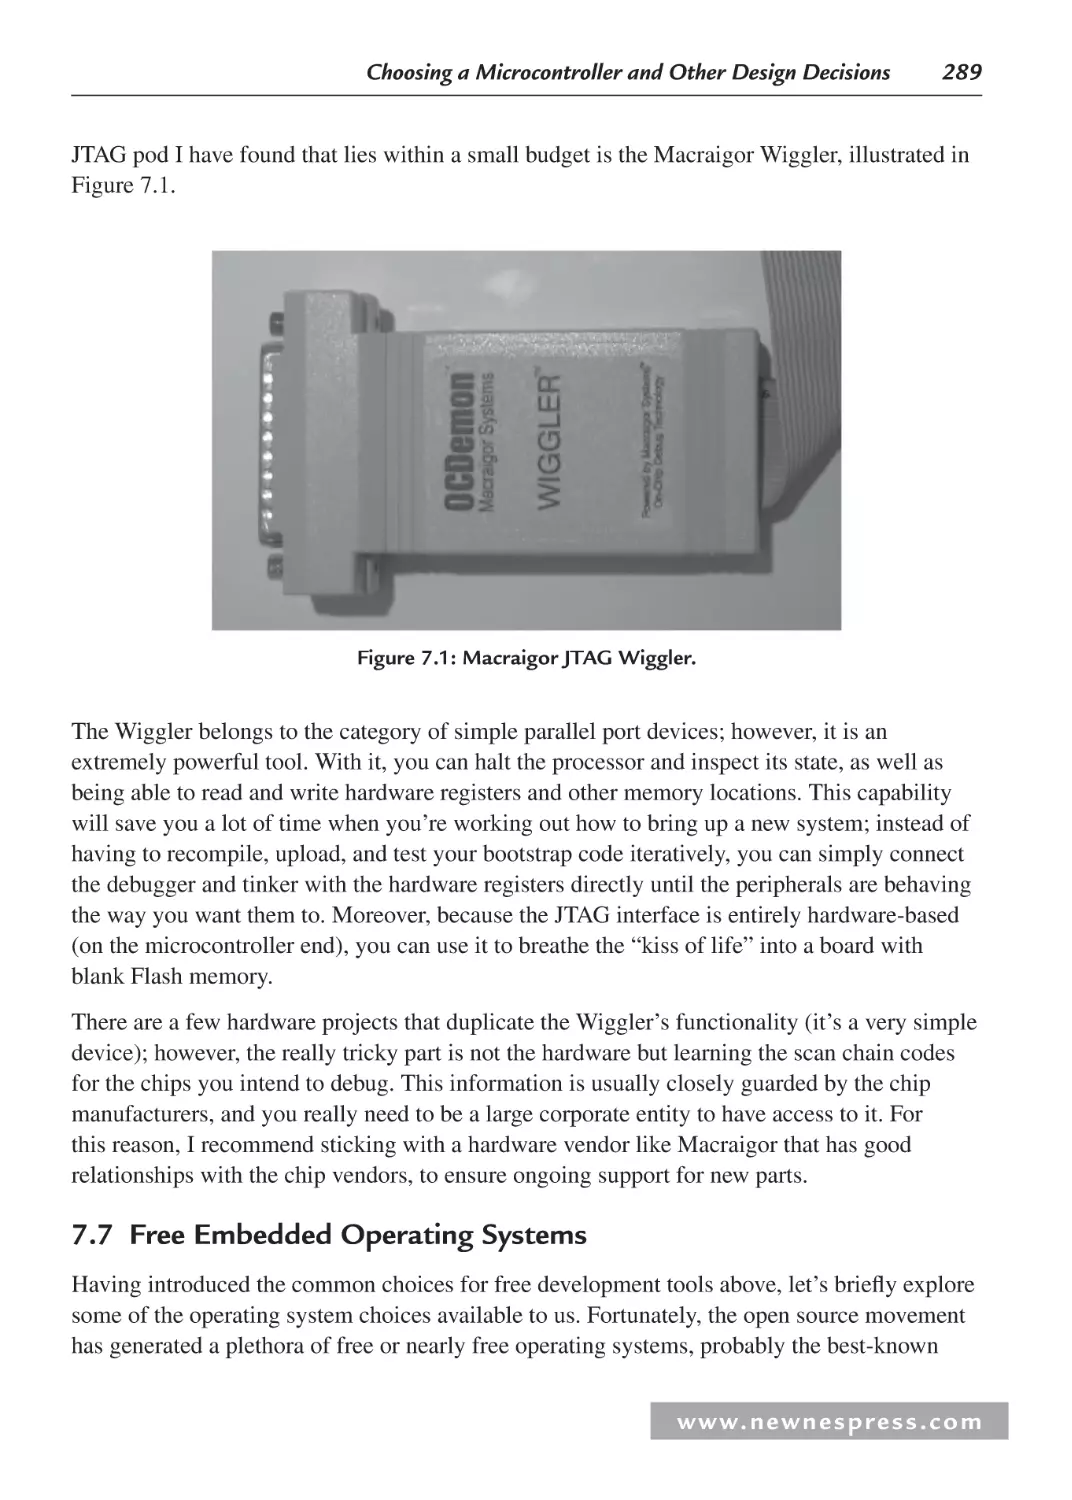 7.7 Free Embedded Operating Systems